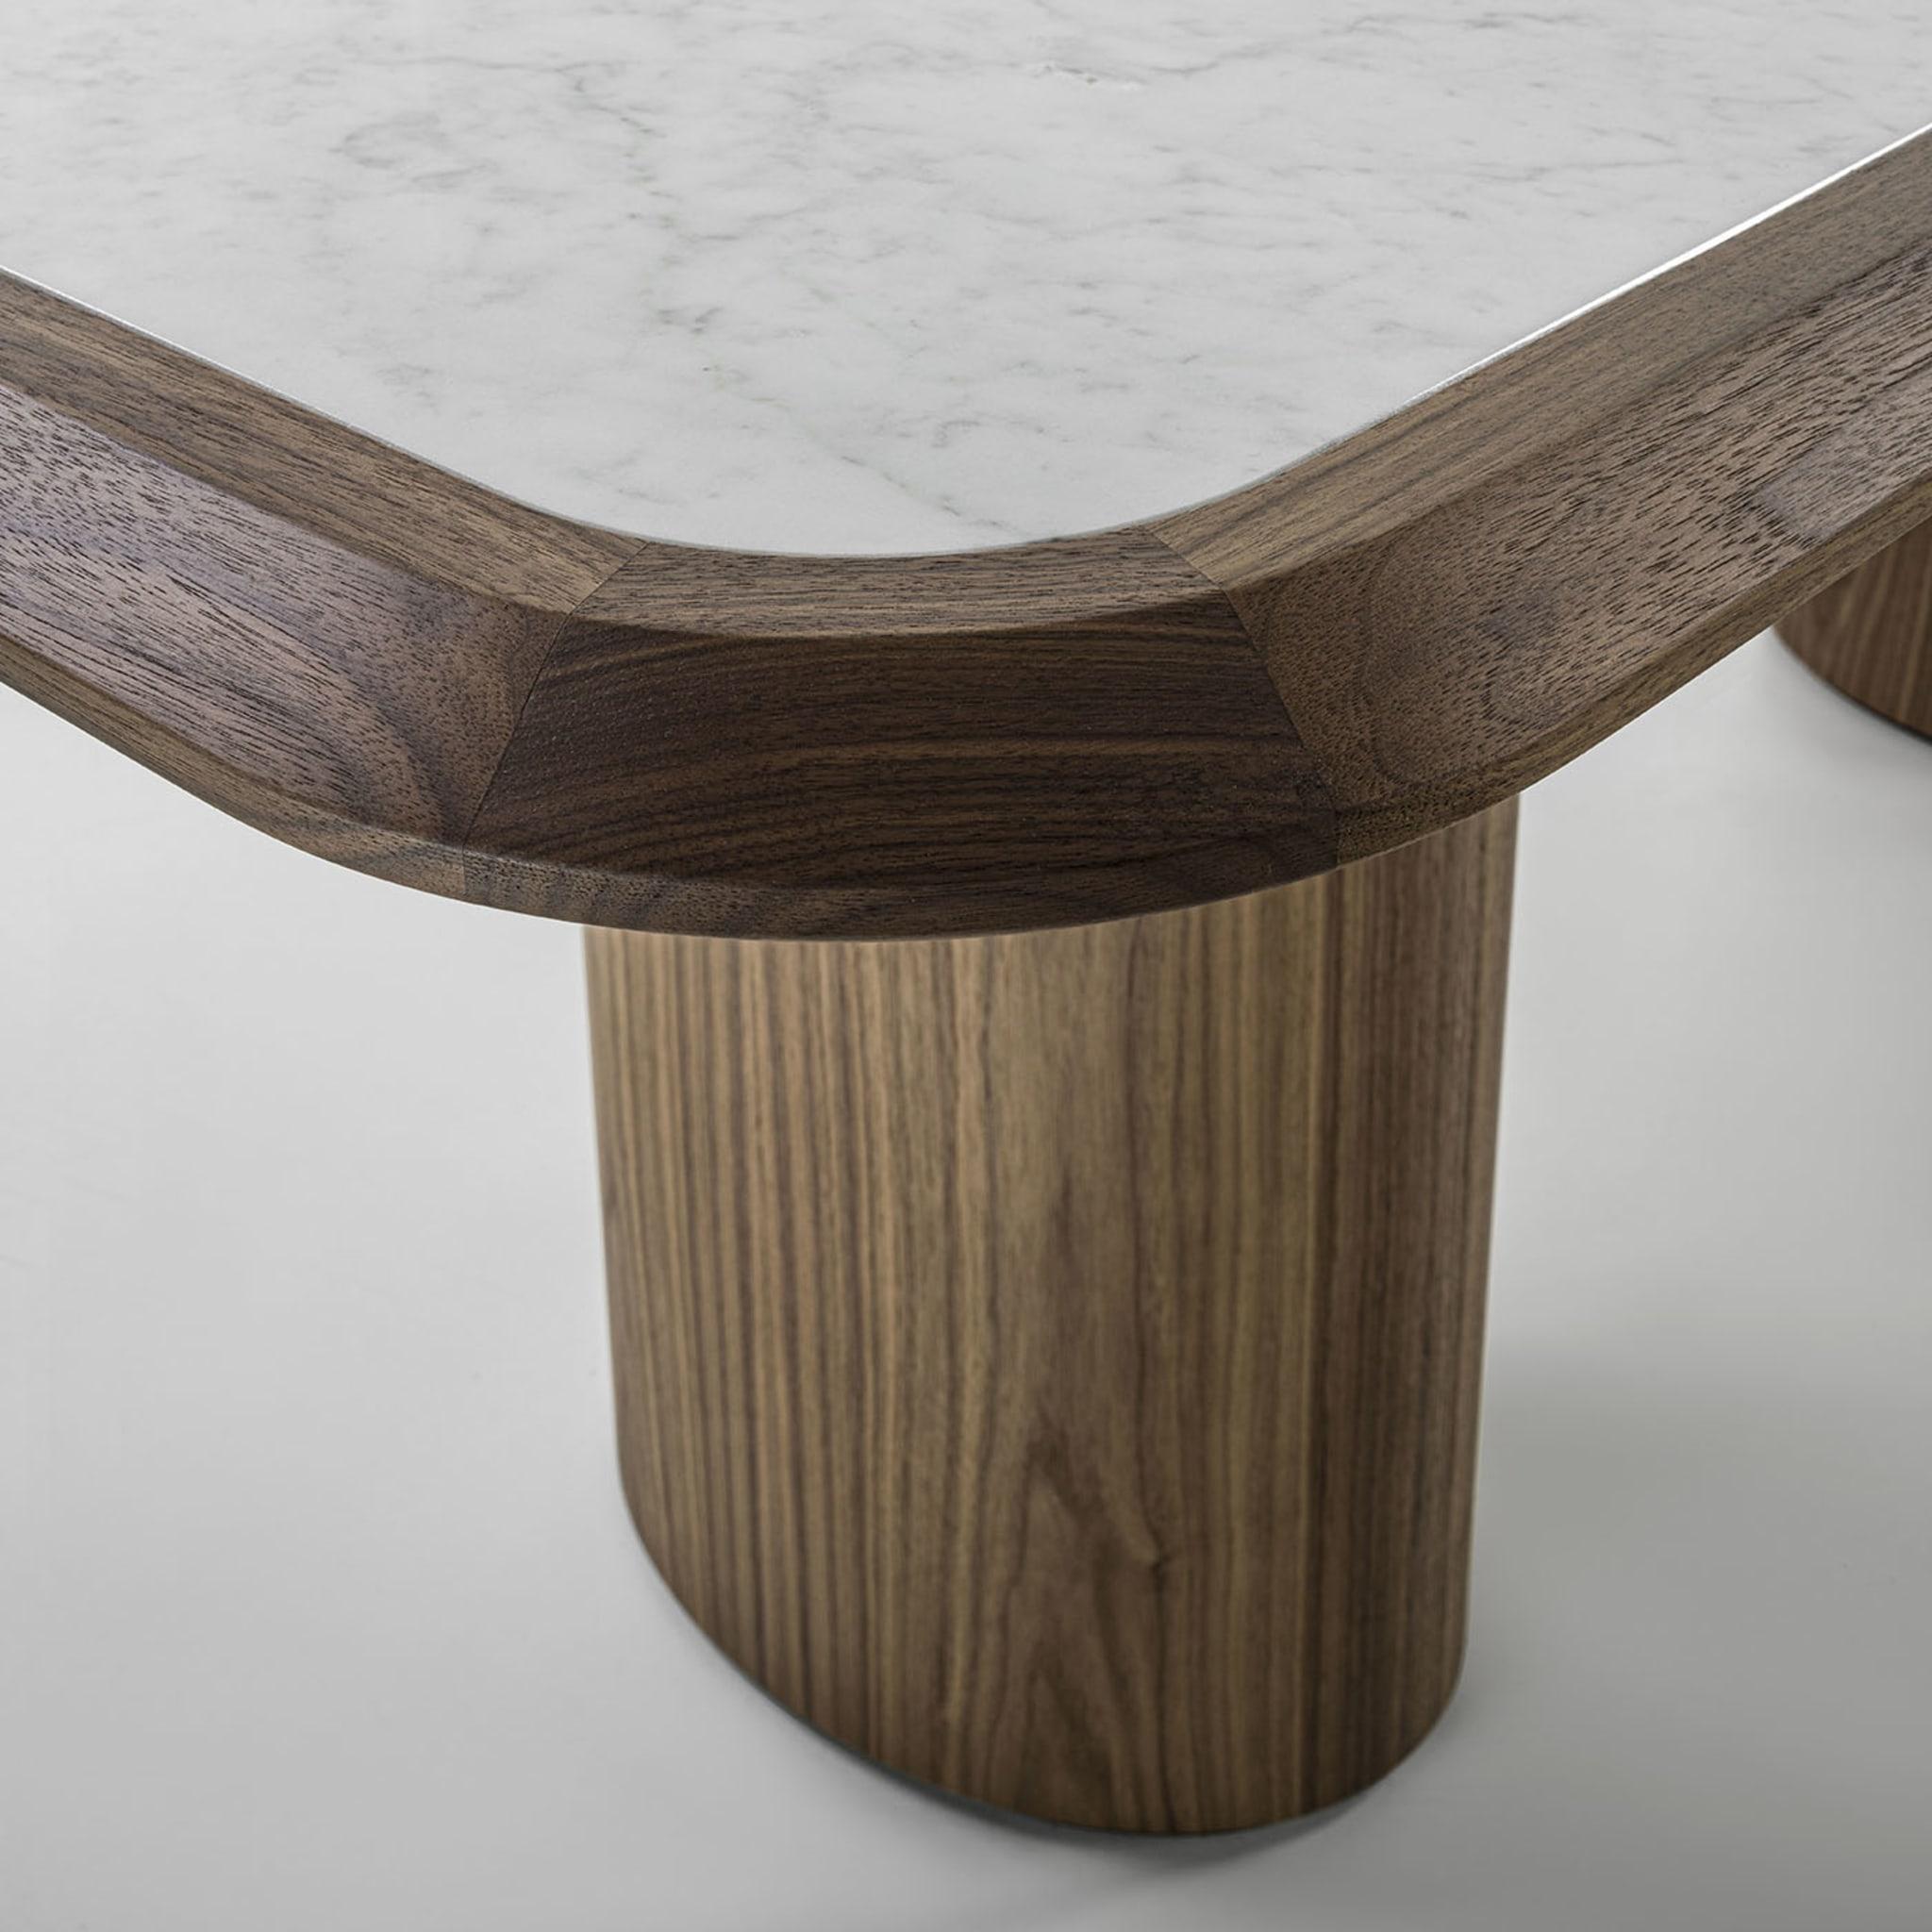 Sophisticated details refusing sharp angularities perfect the already harmonious silhouette of this dining table, crafted of prized Canaletto walnut. Sustained by a couple of column-like legs, the stunning Carrara marble top is set in a refined